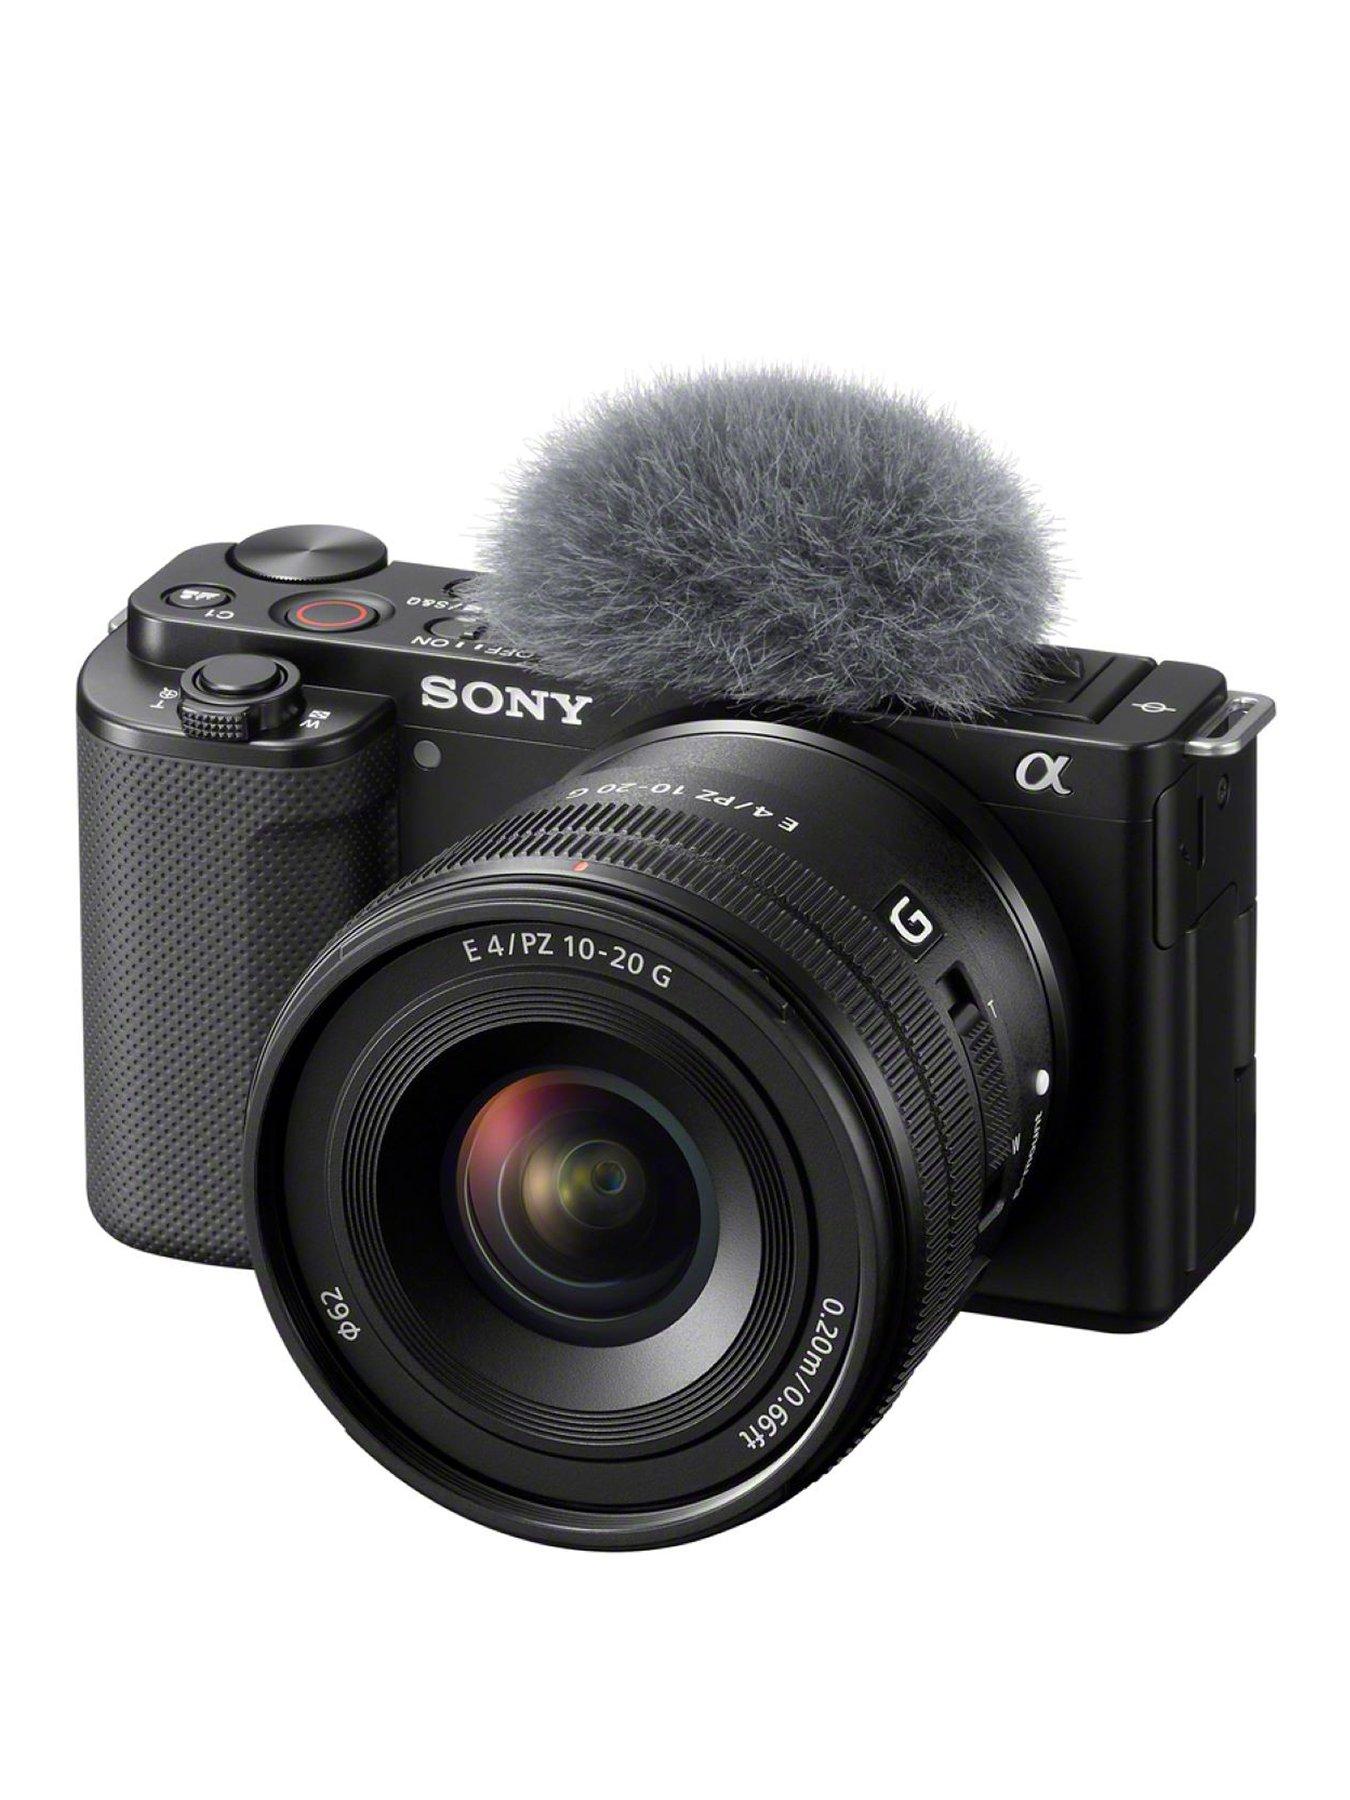 Sony E PZ 10-20 mm F4 G , APS-C Powerzoom Lens (SELP1020G.SYX